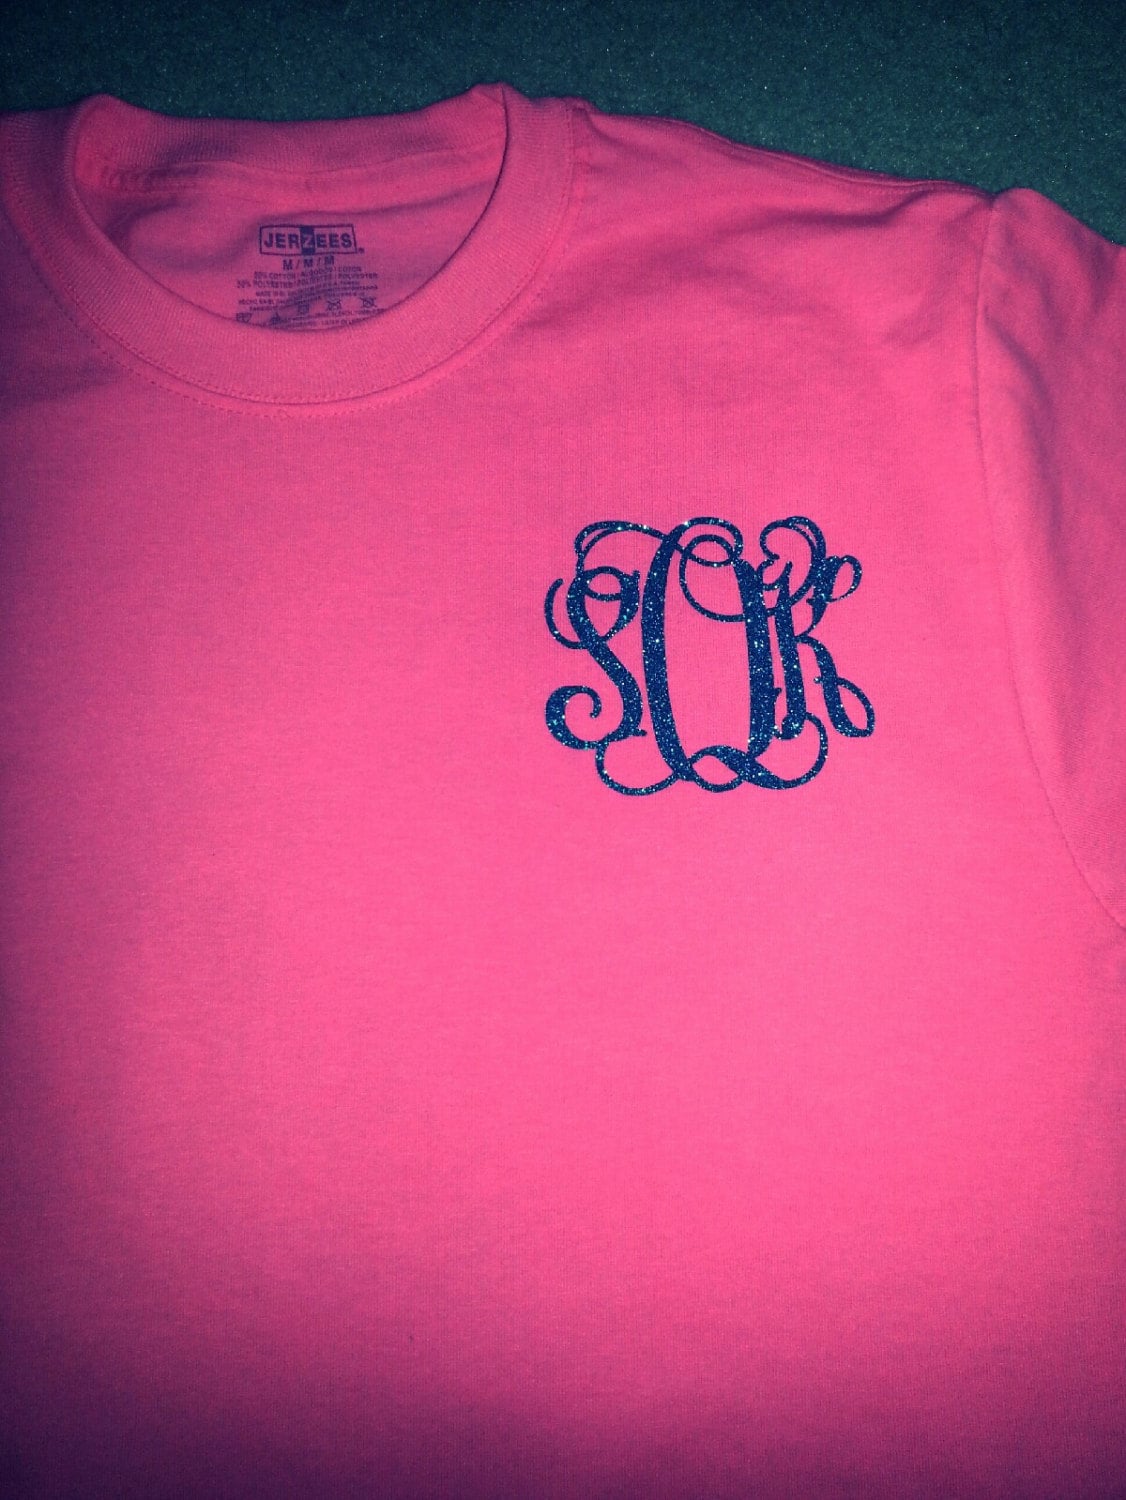 Anchor Monogrammed Shirt by SouthernSass4u on Etsy